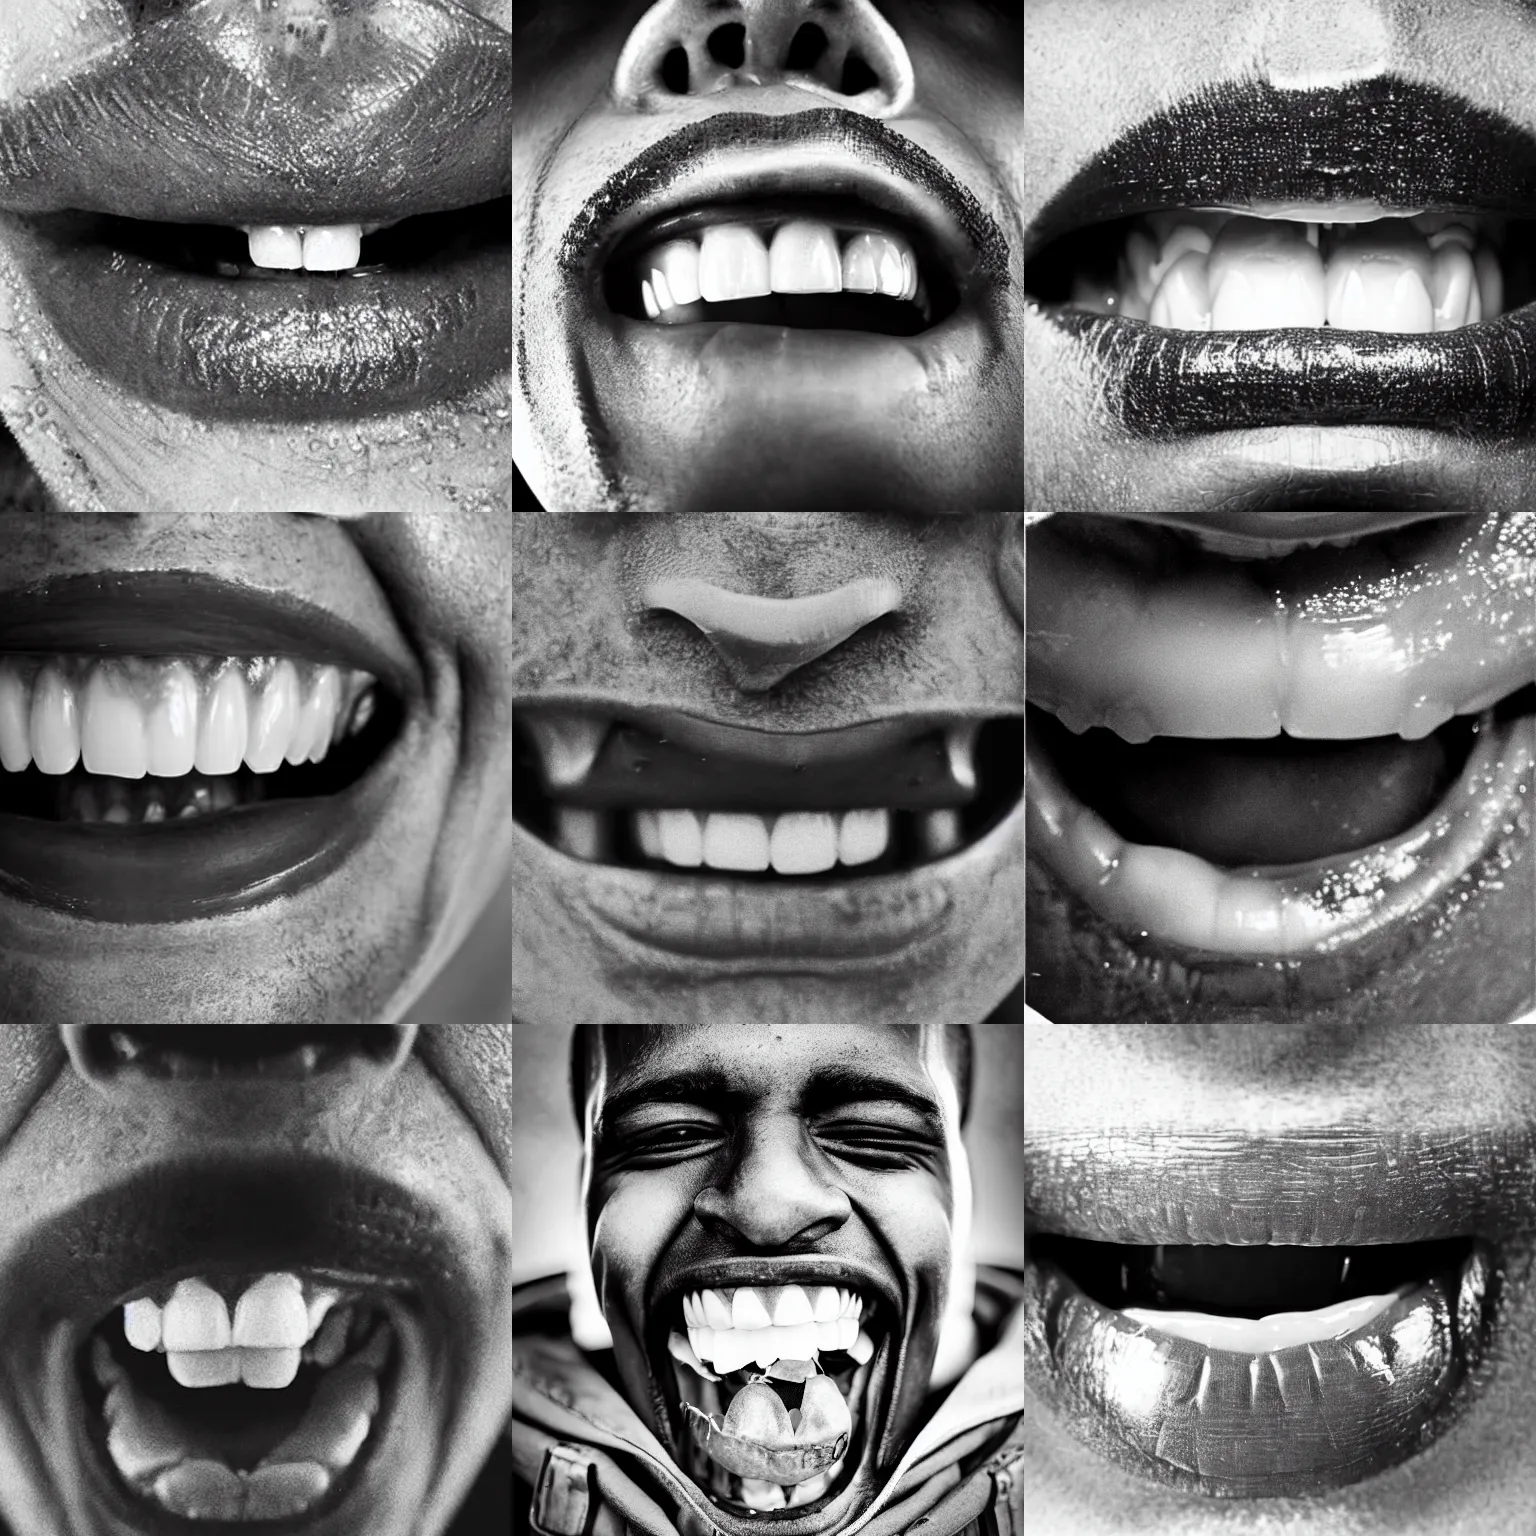 Prompt: close up of man's mouth open with upper and lower metallic tooth grills, gritty grainy black and white film photograph, album artwork